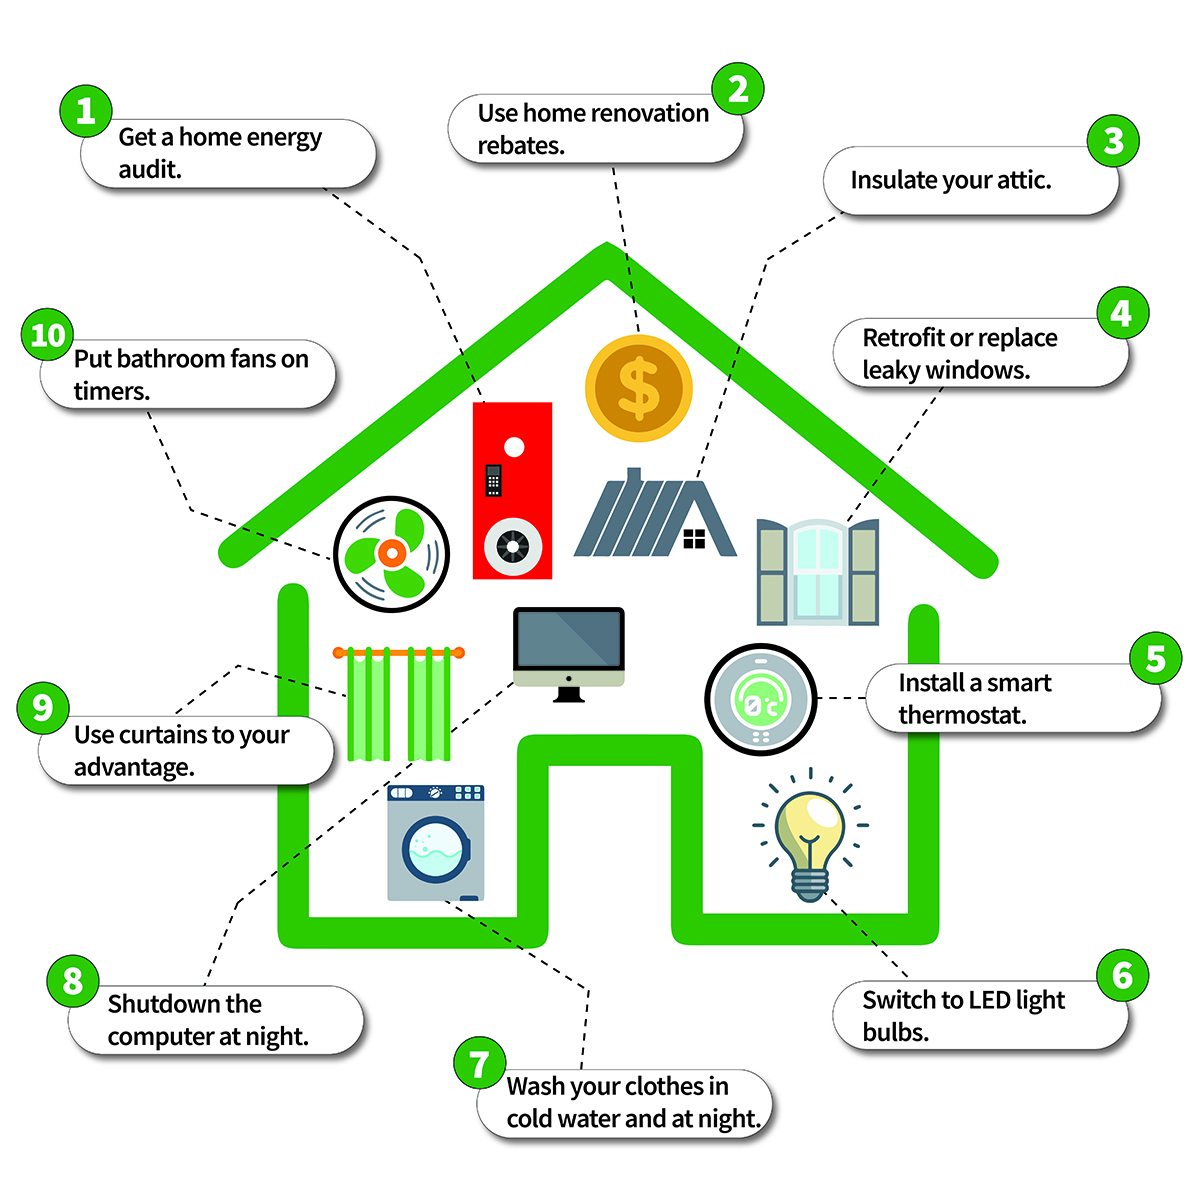 Top 10 ways to save energy in 2019 infographic